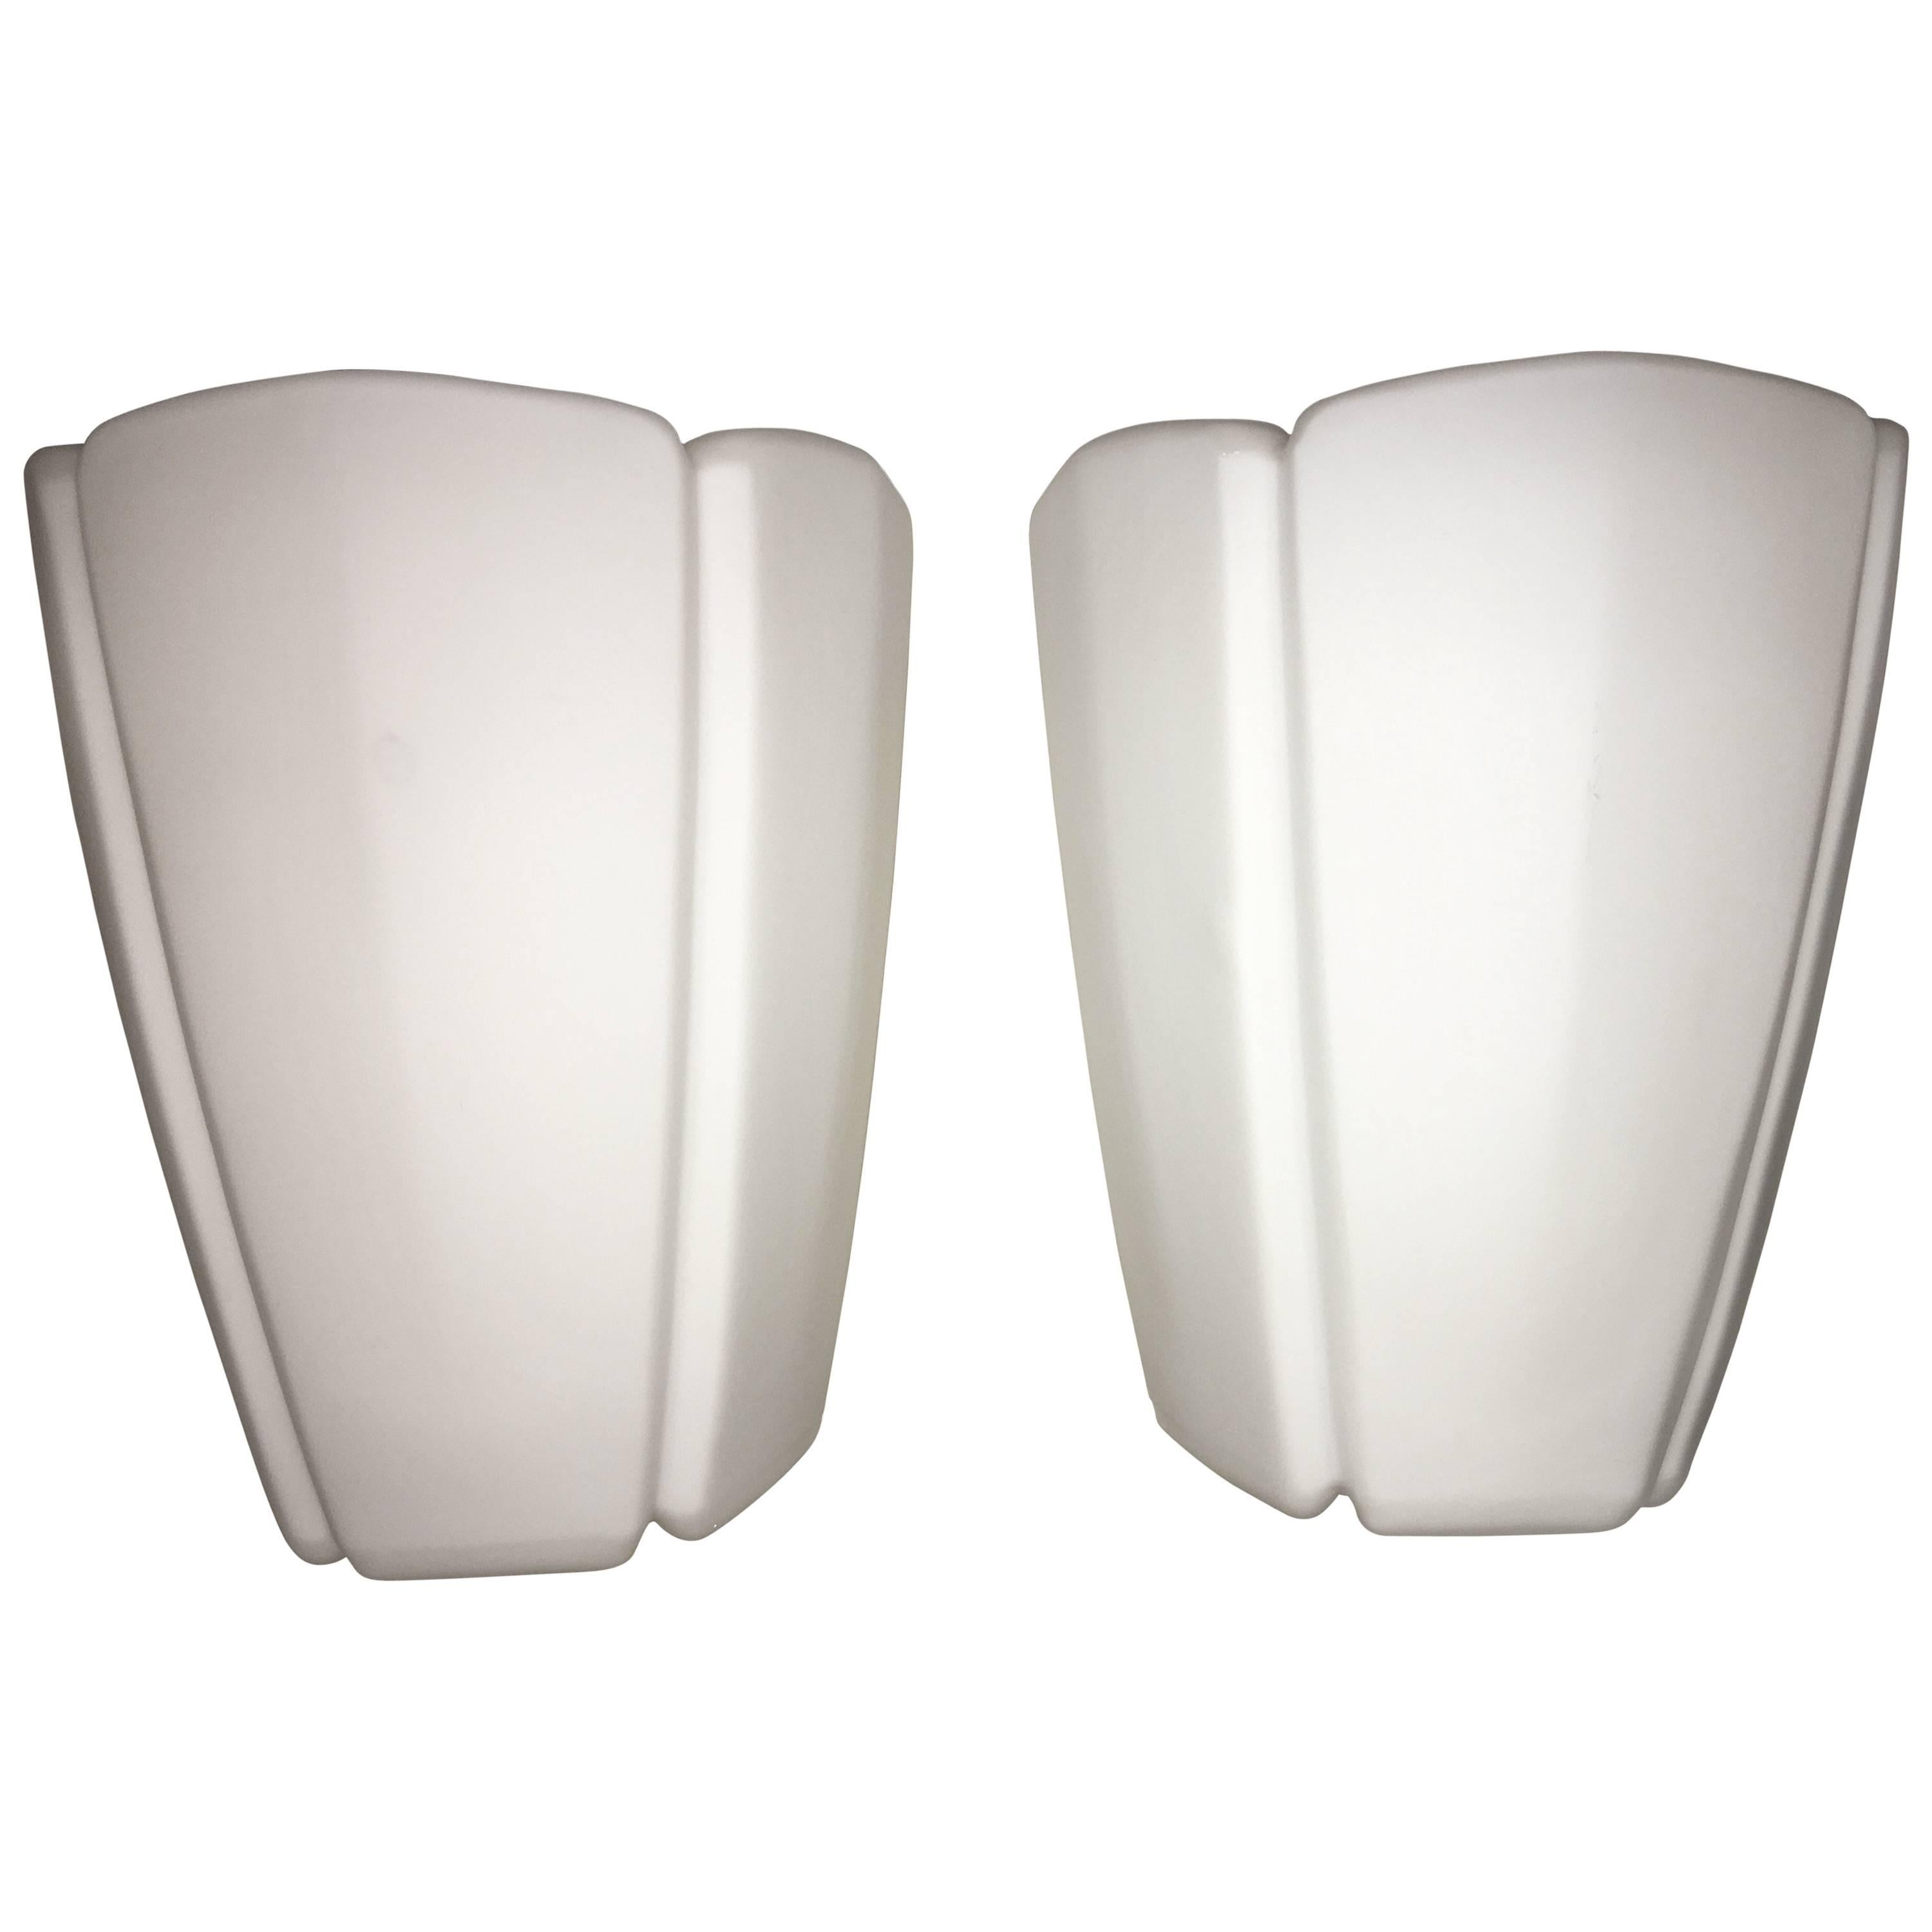 Pair of 1960s Milk Glass Sconces by Limburg Germany - 2 pair available For Sale